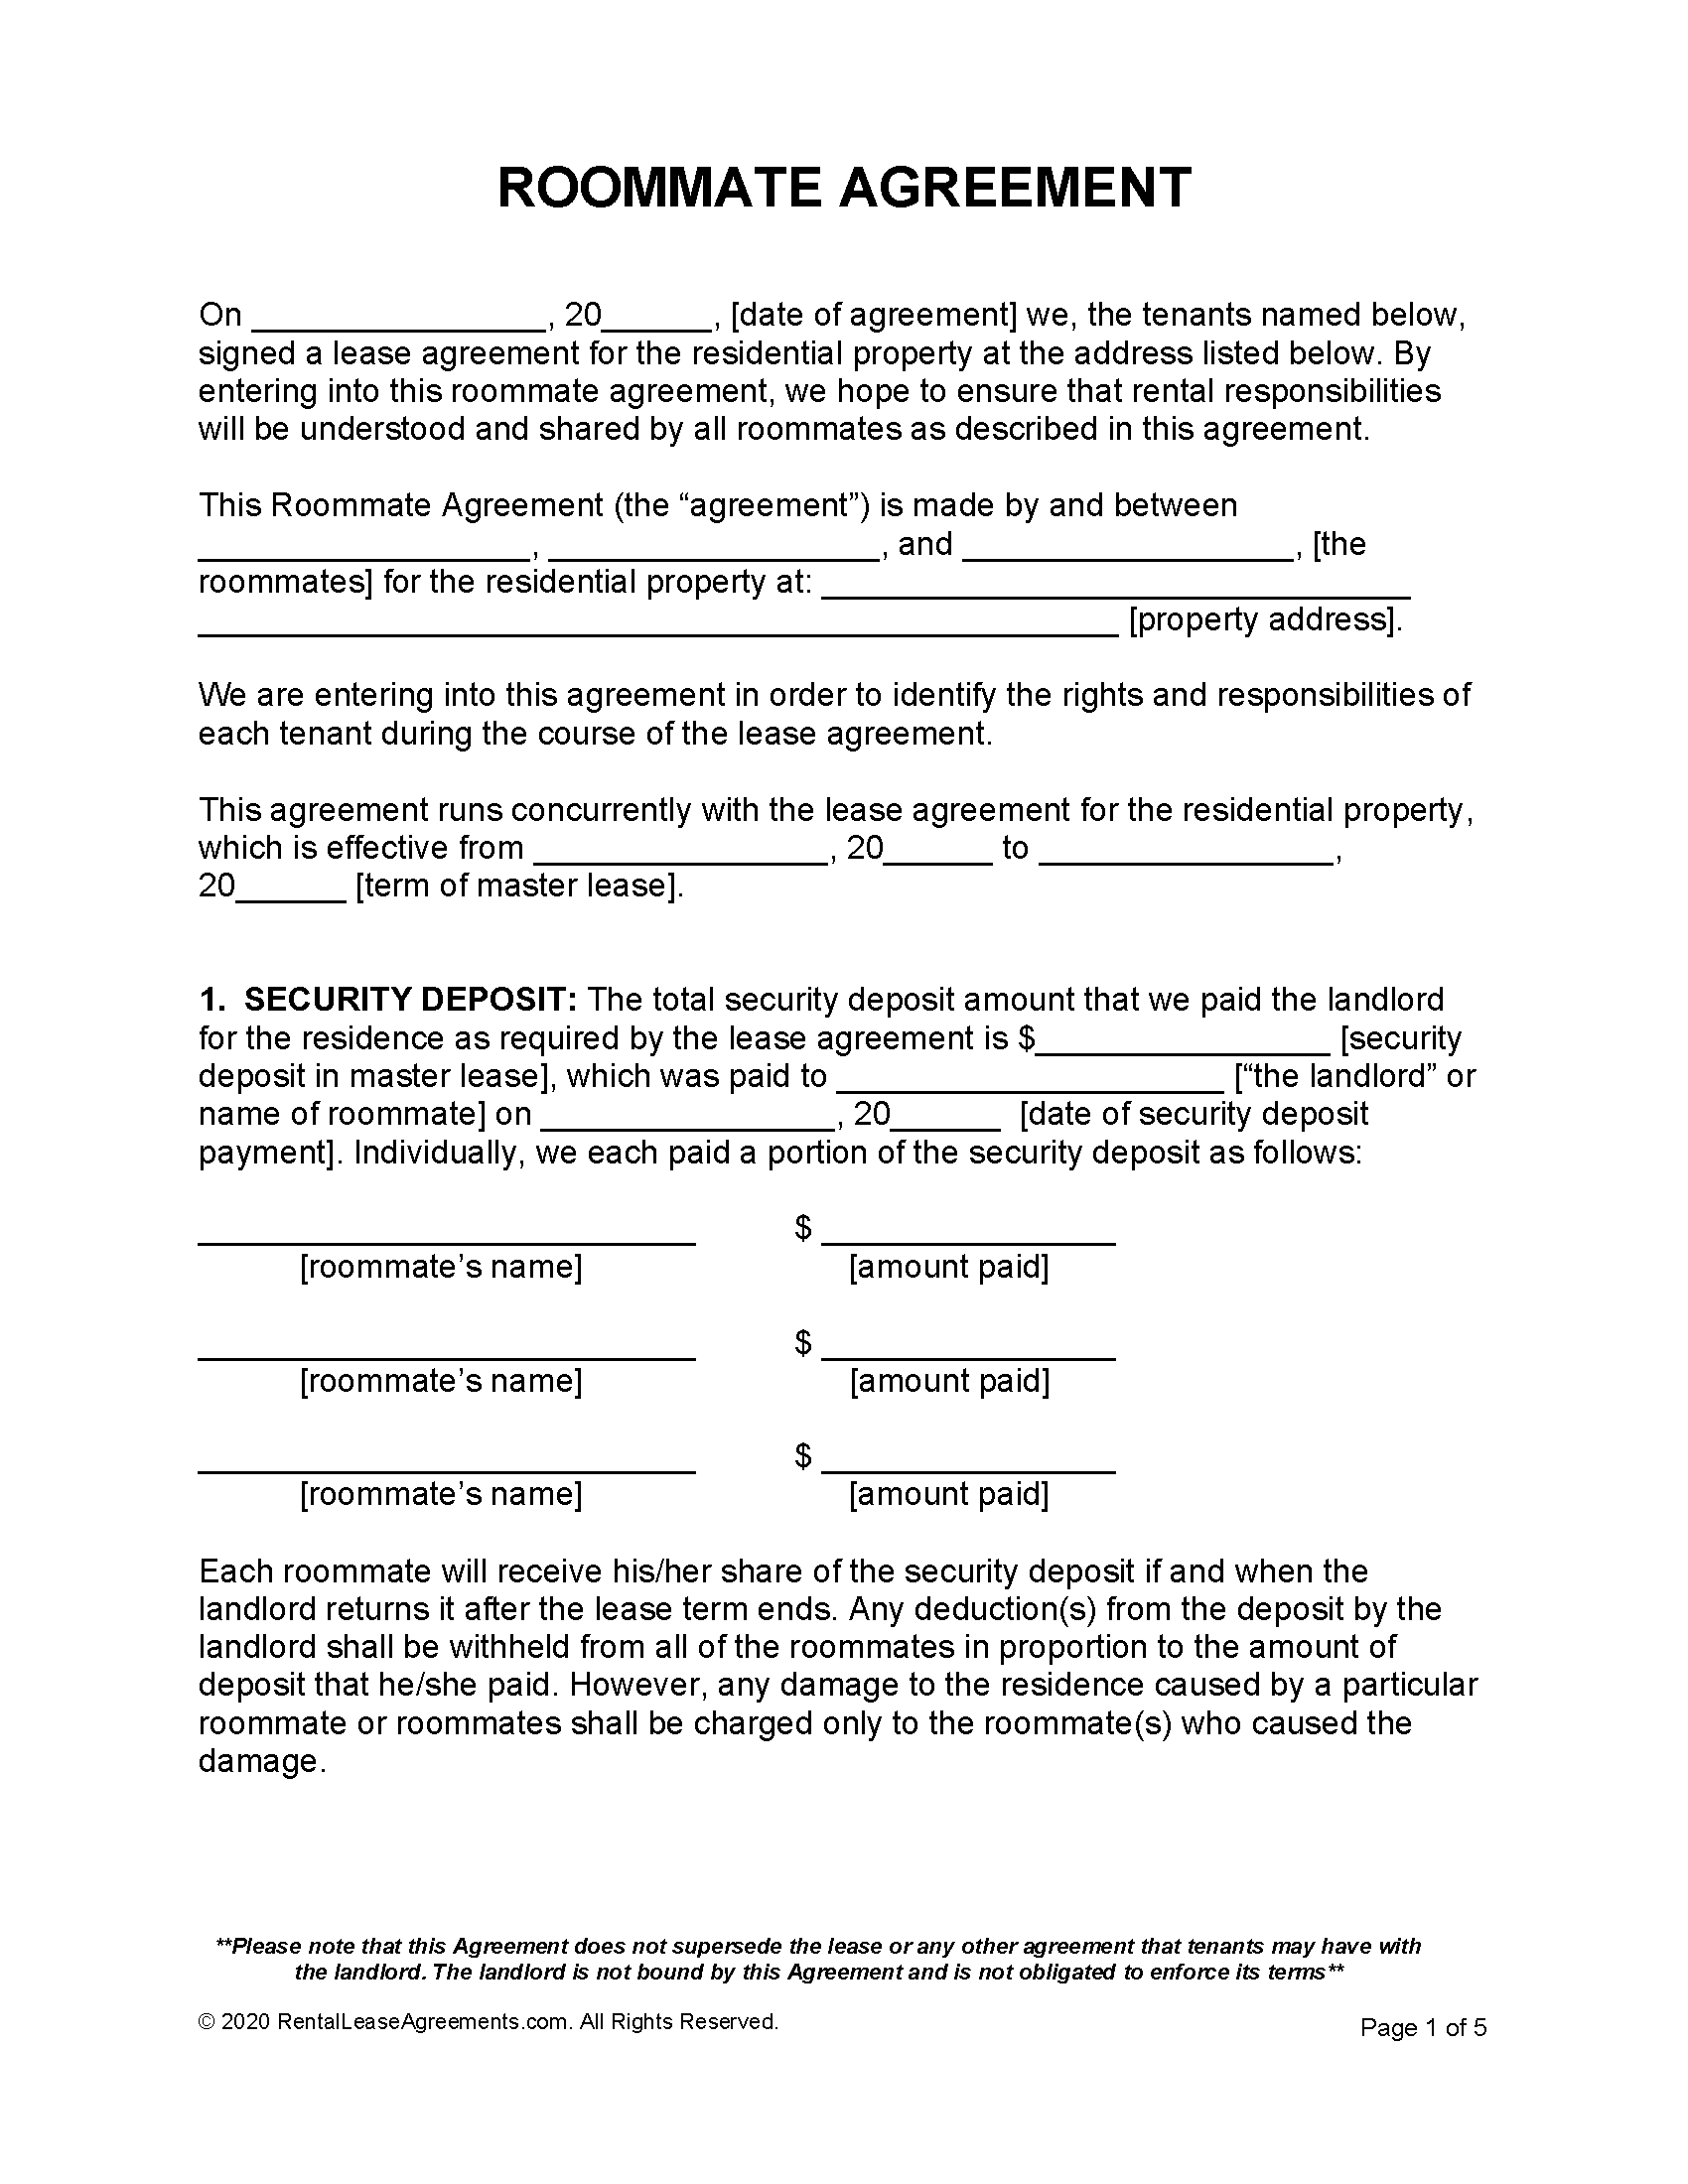 Free Roommate Agreement Template  PDF - Word Within Security Deposit Agreement Between Roommates With Regard To Security Deposit Agreement Between Roommates